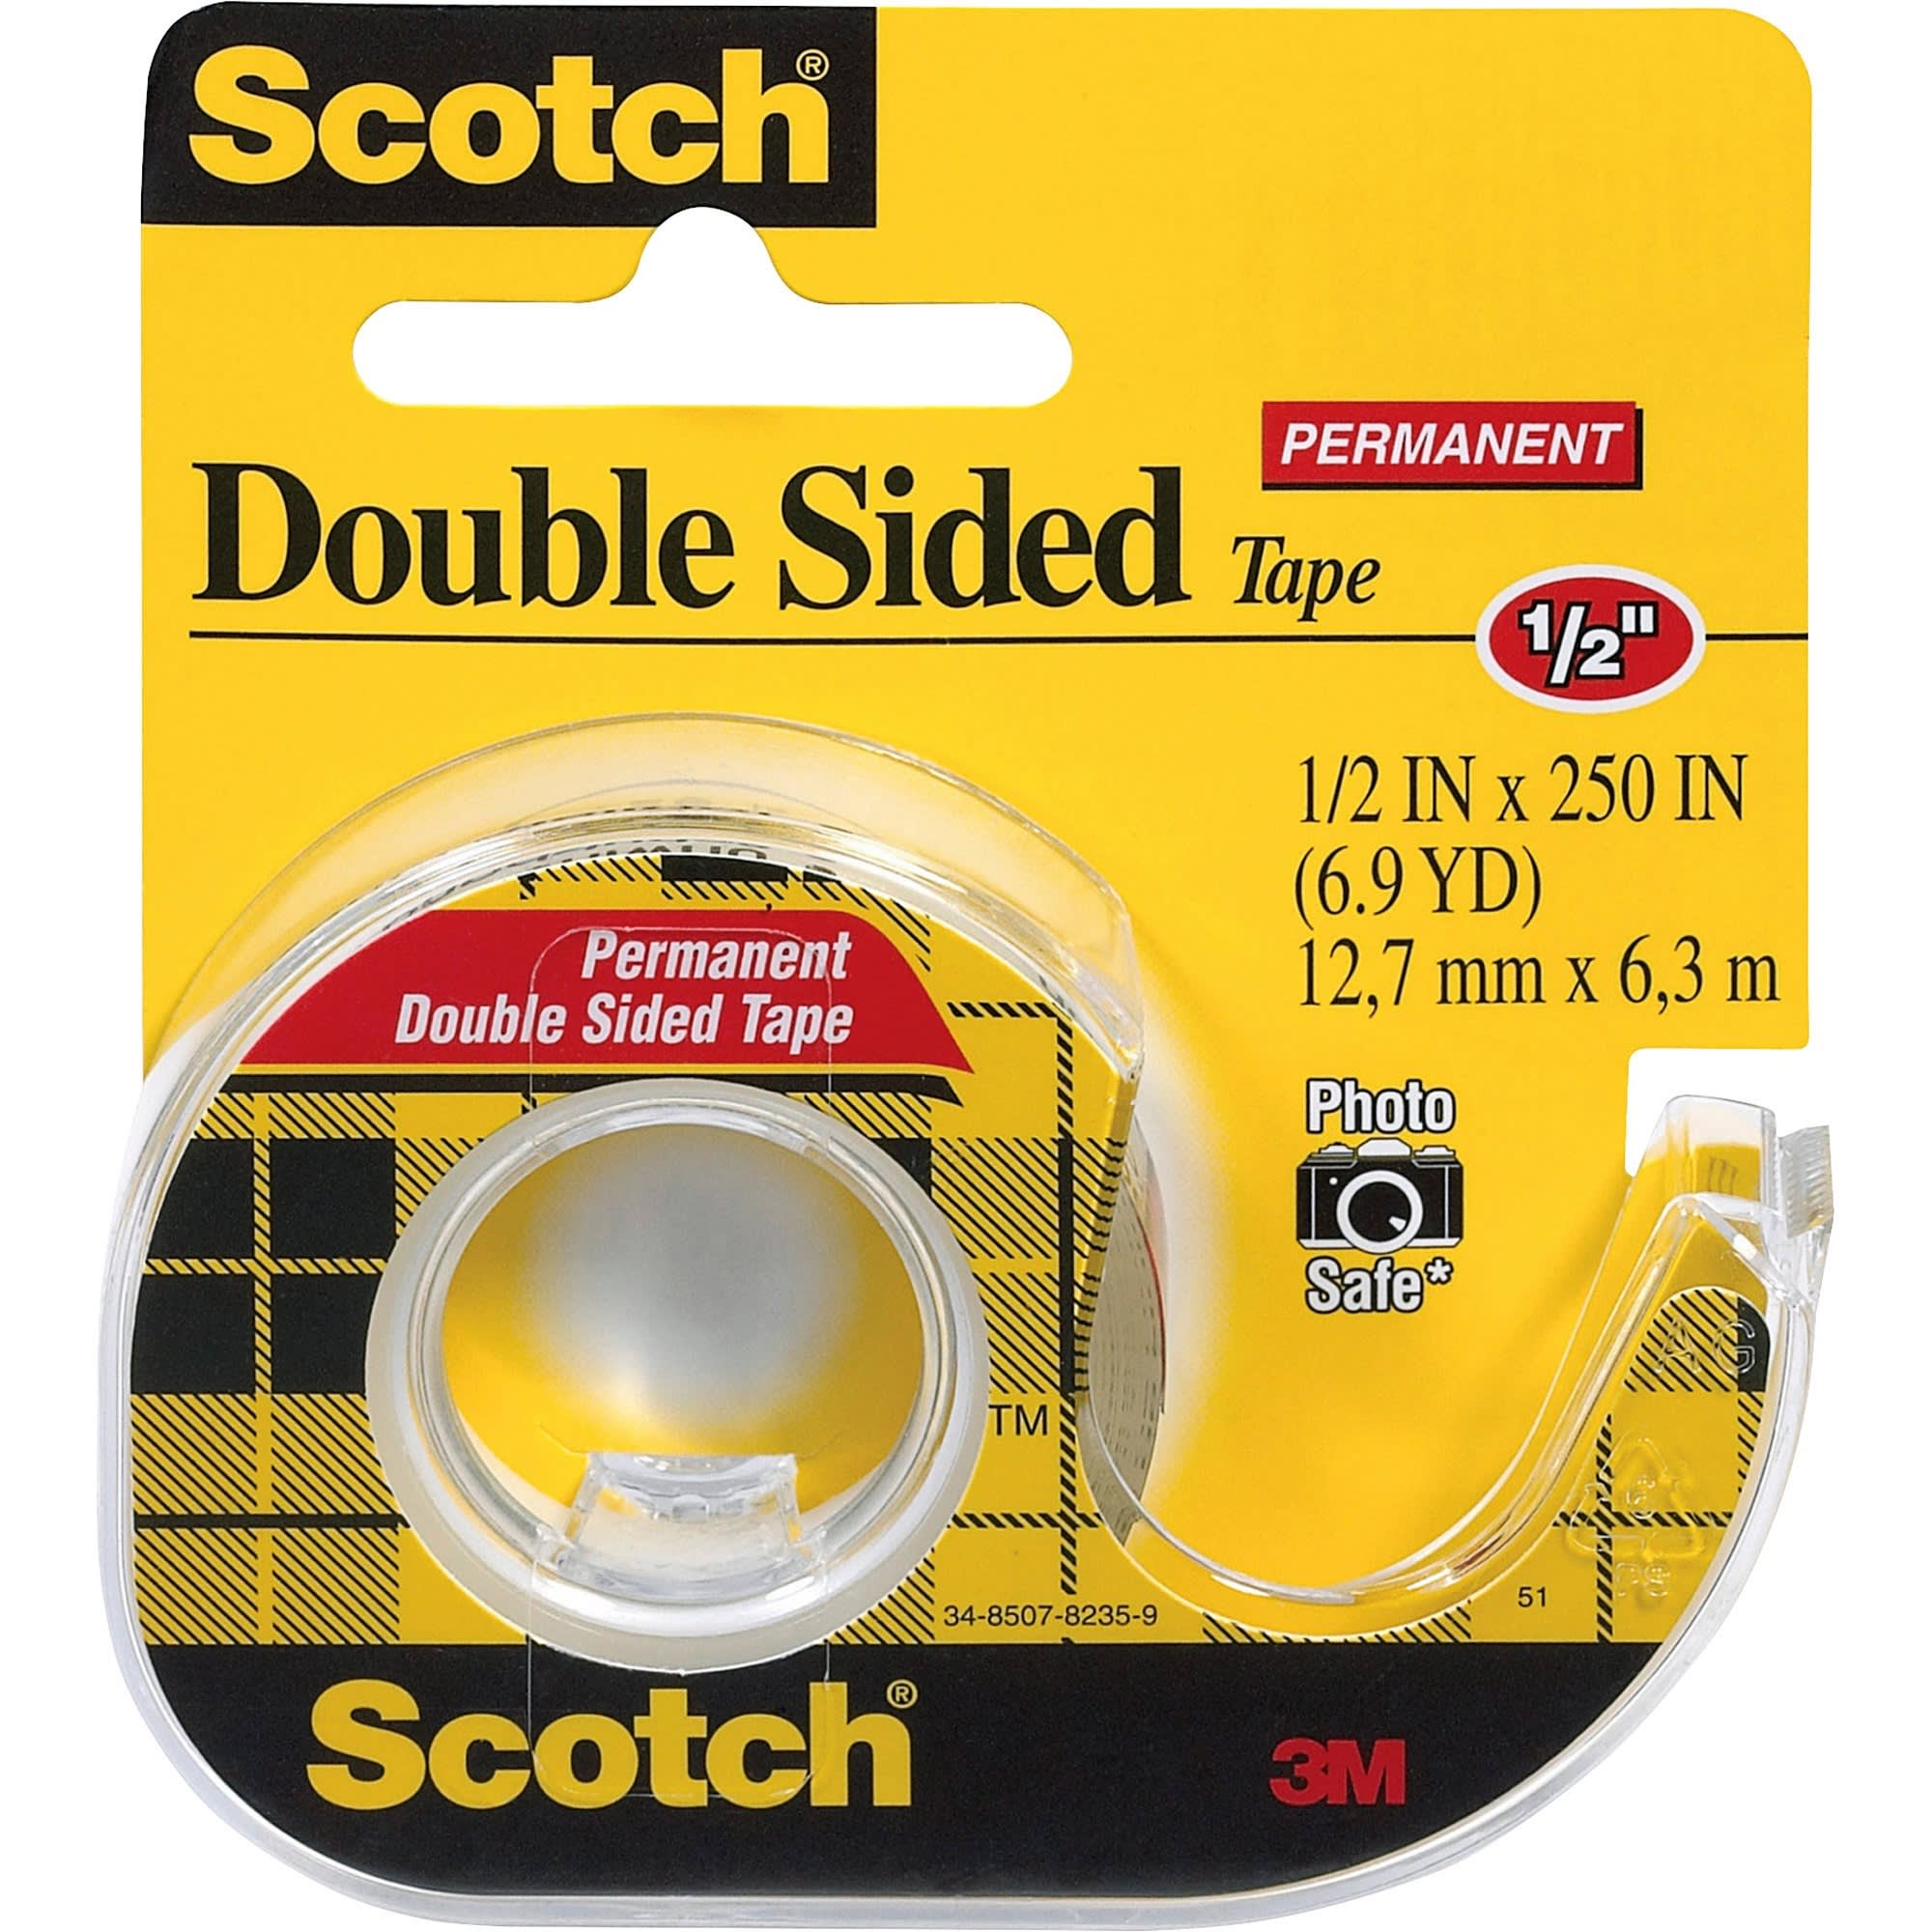 2-Sided Adhesive Tape Heavy Duty 2 X 36 Yards